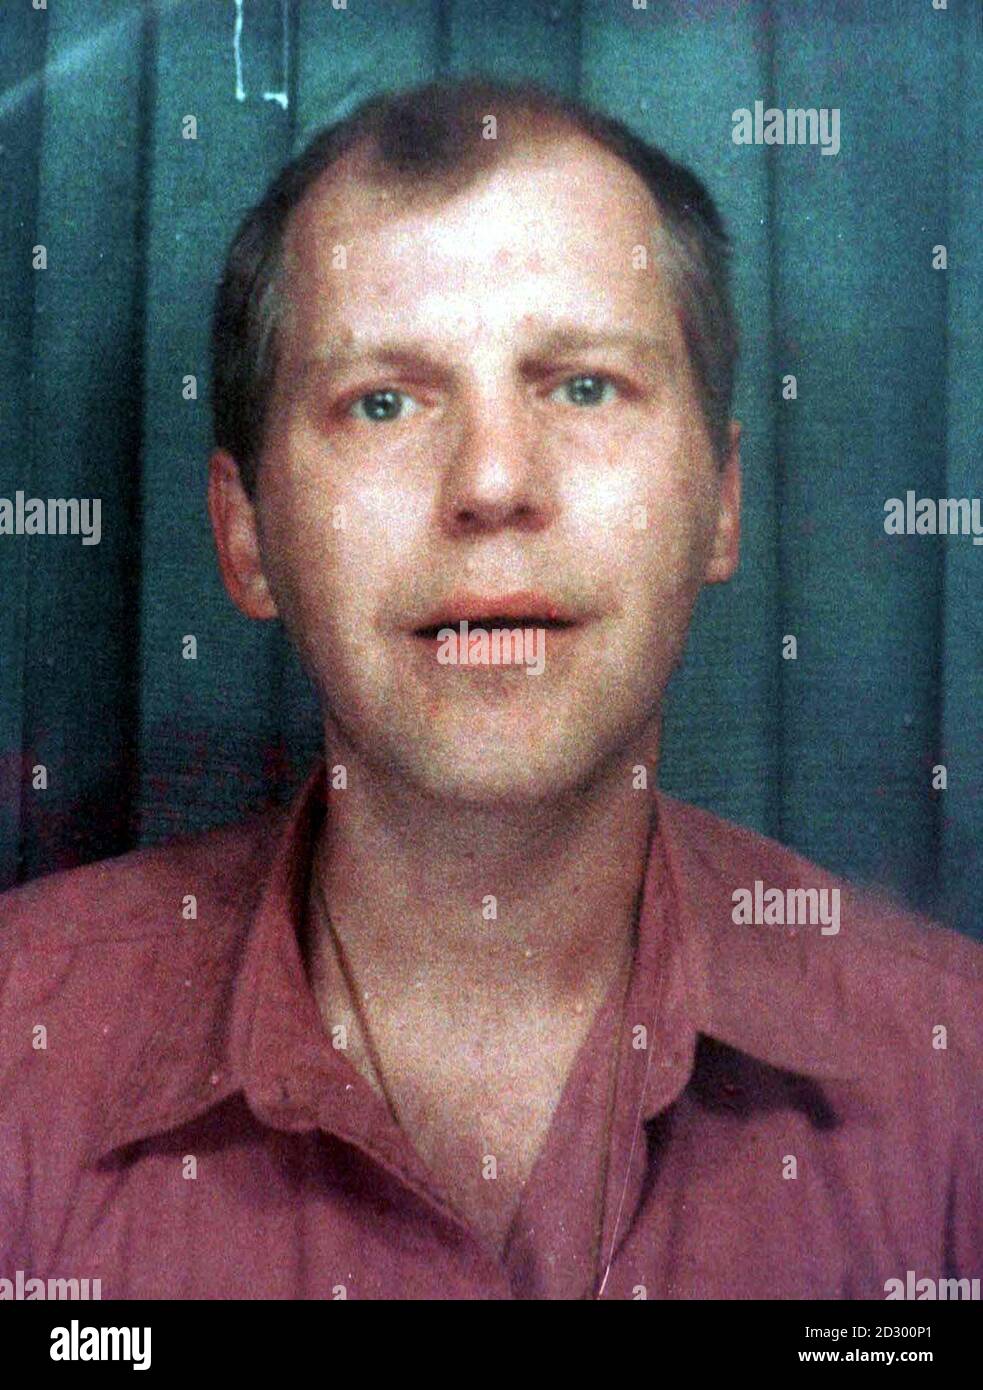 Unemployed Michael Stone, who is accused of murdering Lin Russell and her six year old daughter Megan, and the attempting to murder Josie Russell. 23/10/98: Stone has been found guilty on all three counts at Maidstone Crown Court. * 24/1/99: Stone suffered head injuries after he was attacked by an inmate at top security Frankland Prison in Co Durham.17/7/99: Stone has gone on hunger strike to protest his innocence. Stone has only been taking fluids. 08/10/2000 Shaun Russell, whose wife Lin and daughter Megan were murdered in a Kent country lane, has told a Sunday newspaper, of his despair Stock Photo